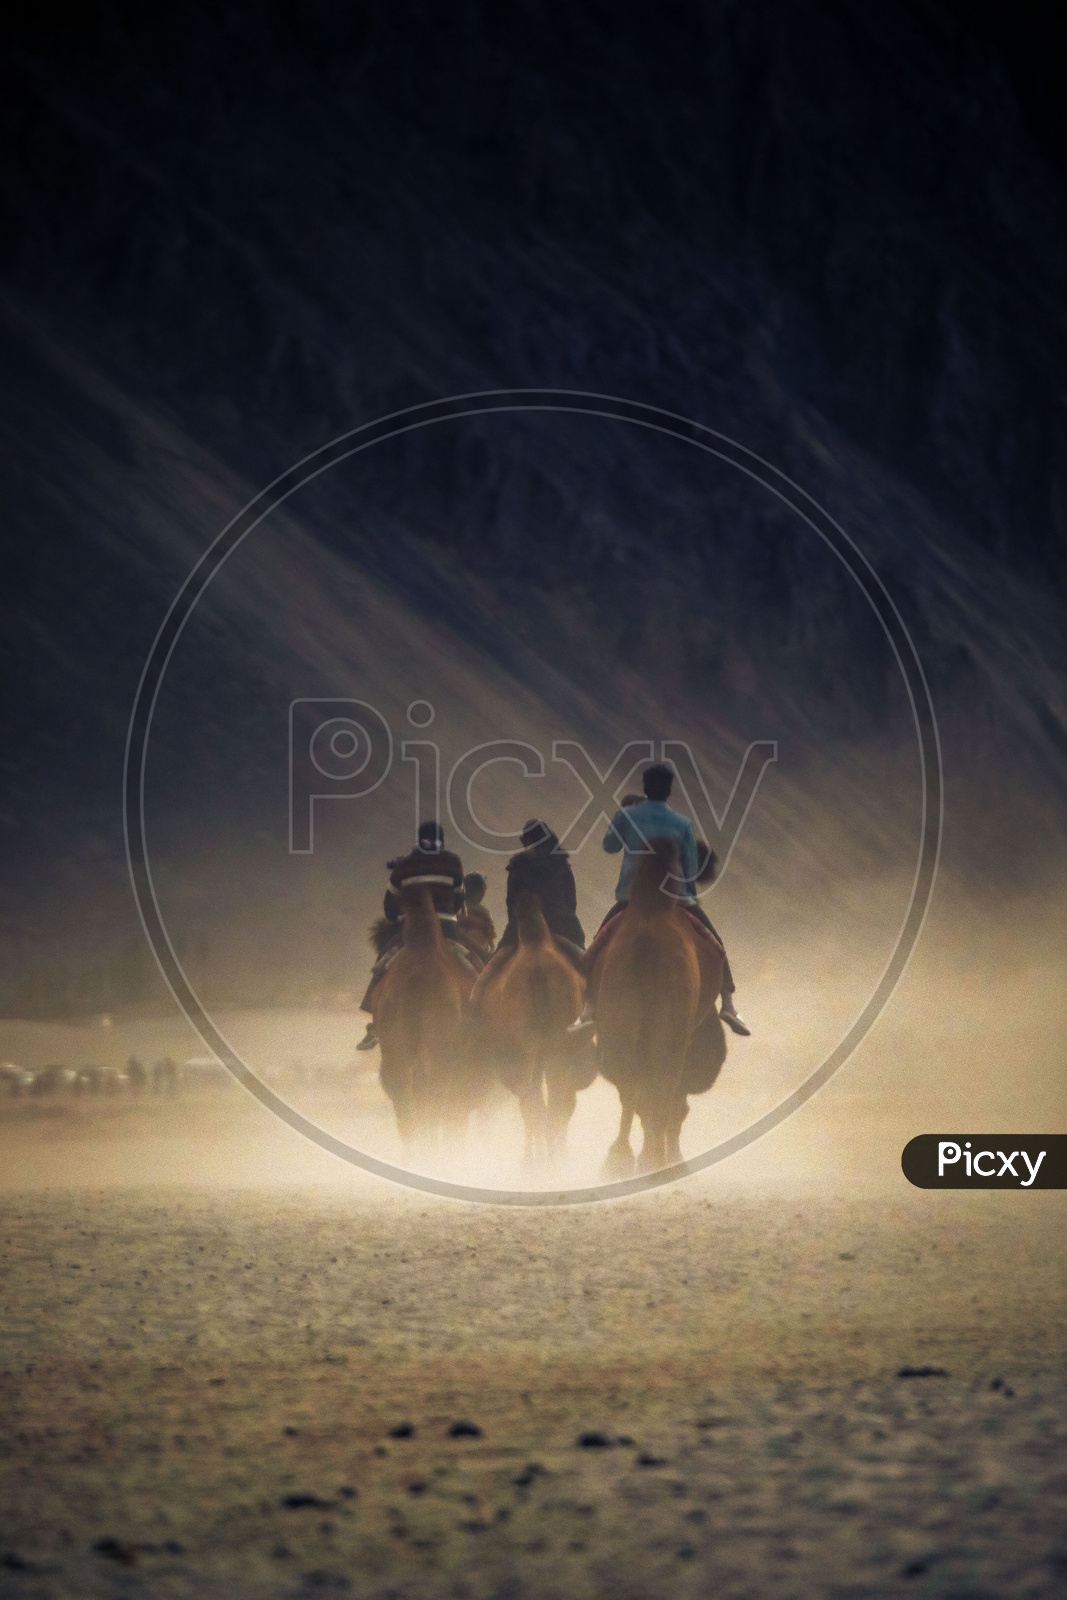 Tourists at Nubra Valley riding on Arabian Camels crossing Sand Dunes.